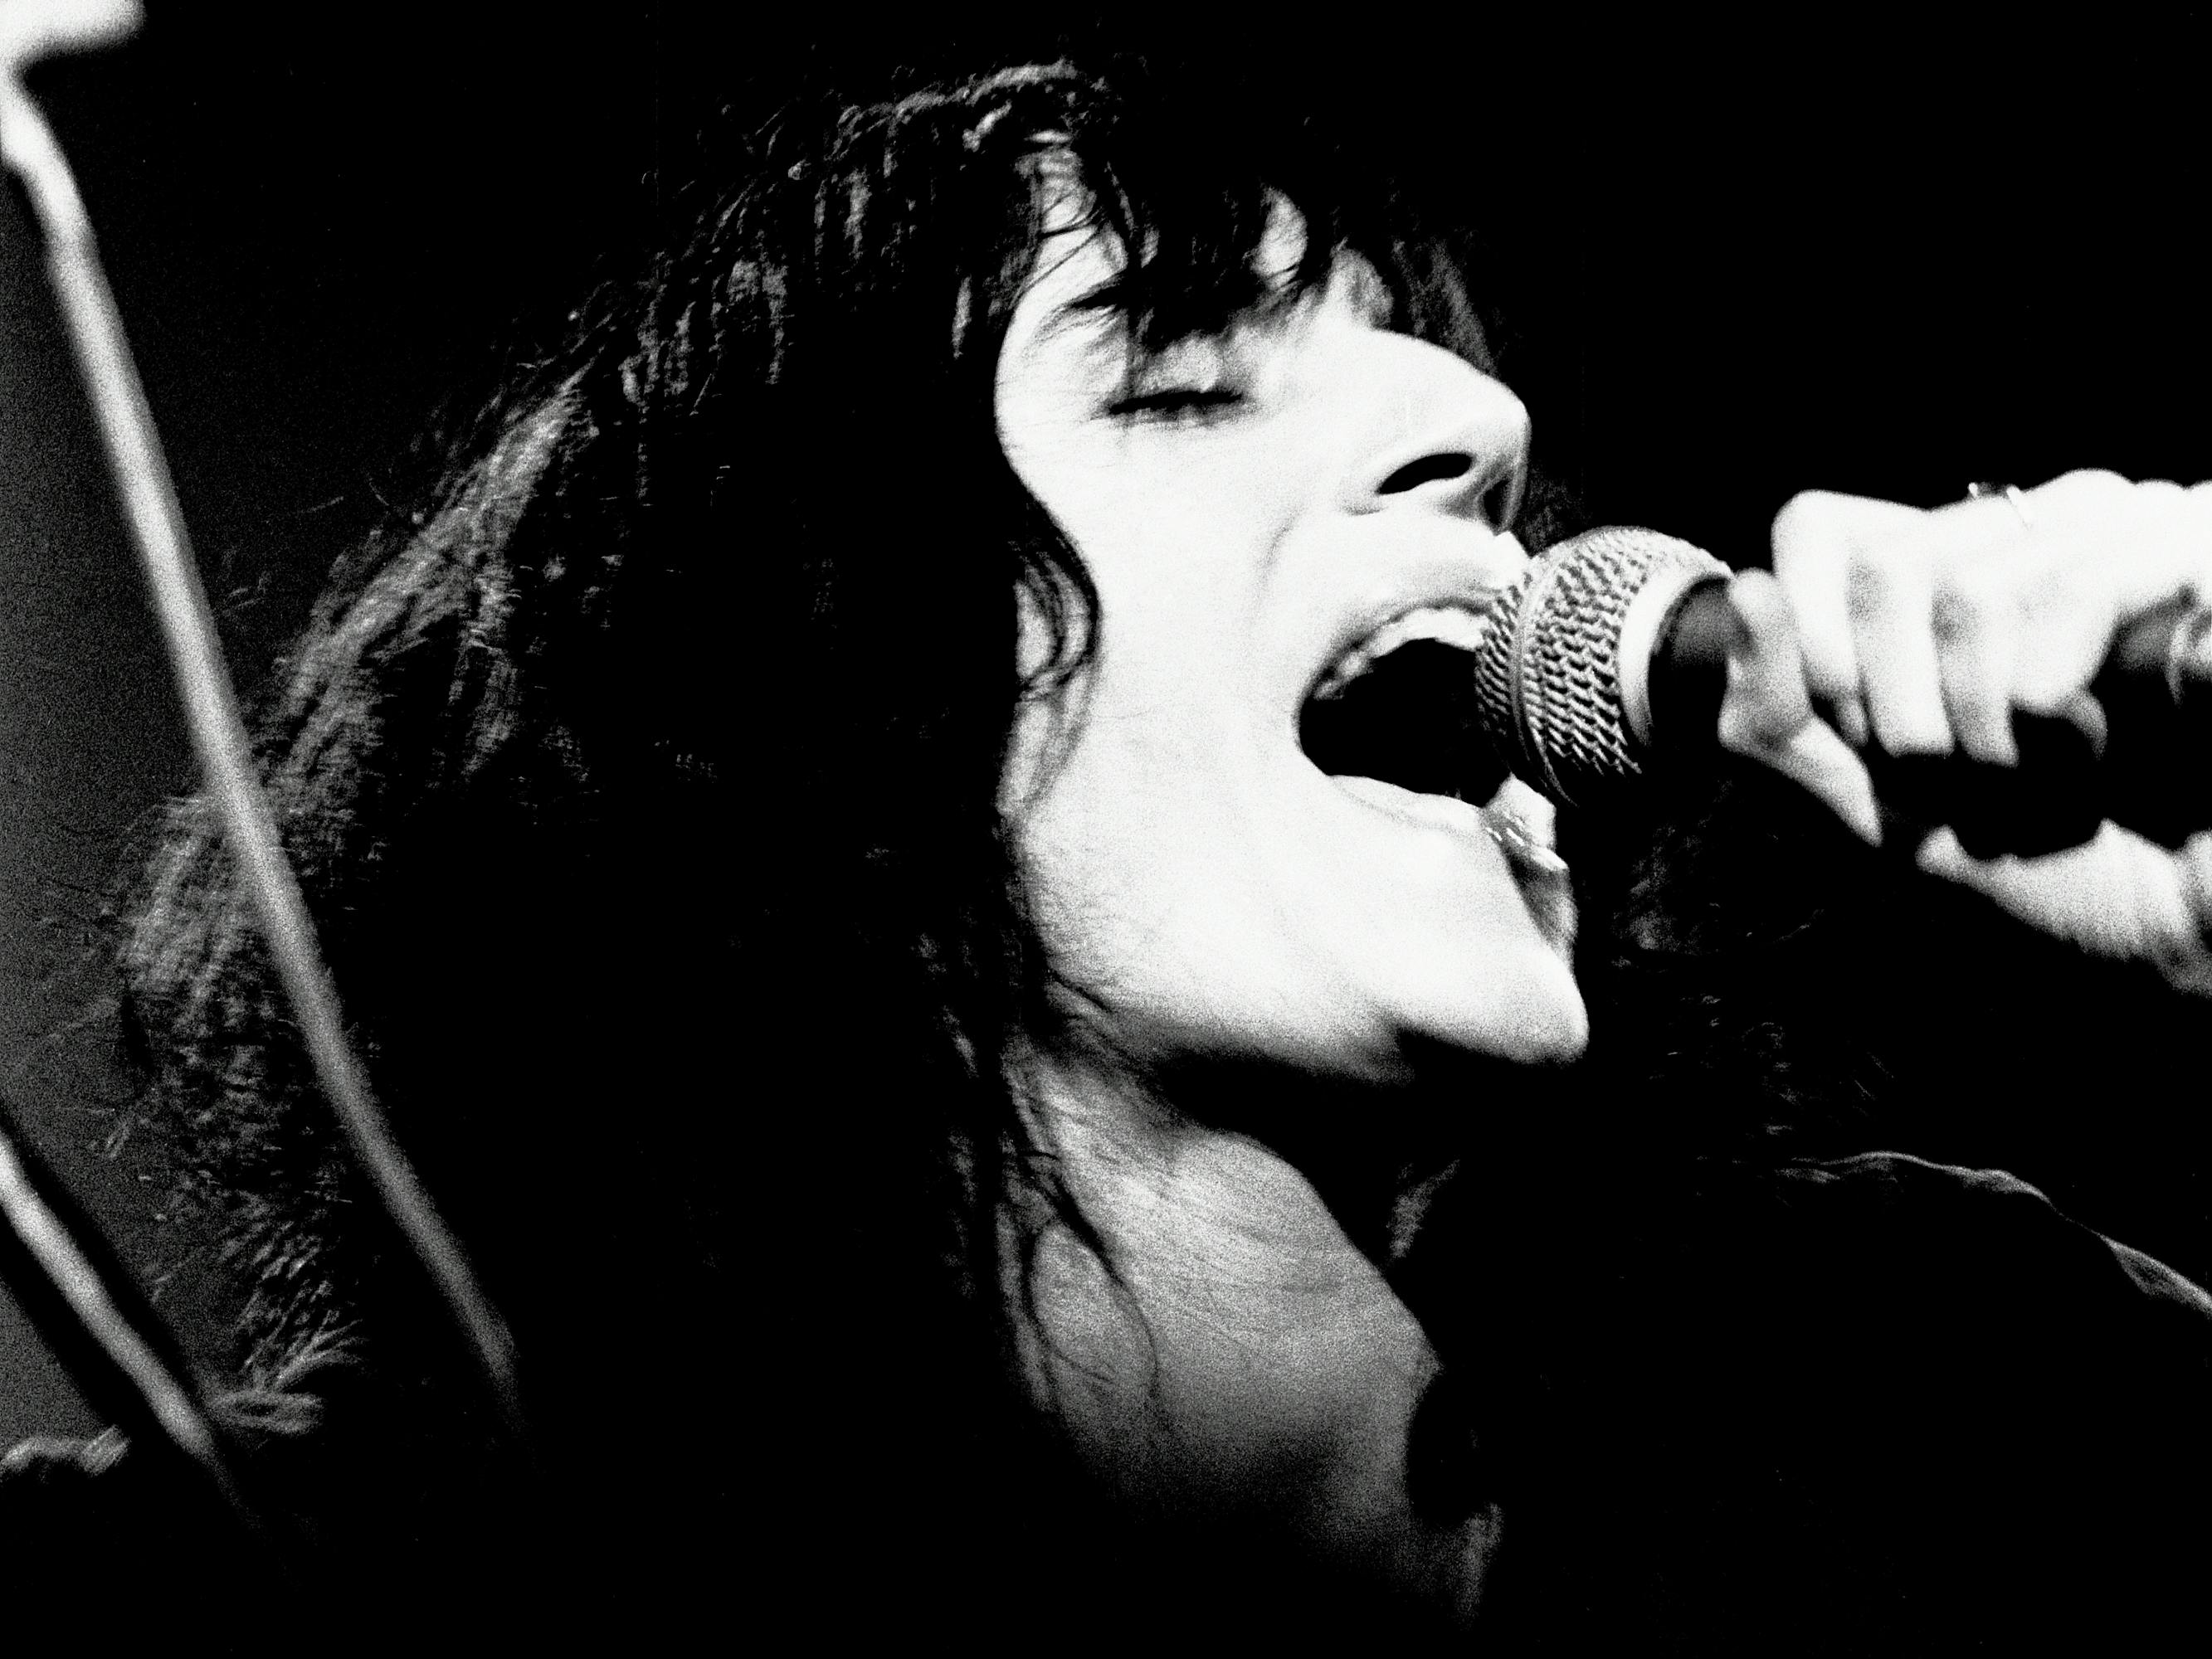 Patti Smith belts into a mic. Such an icon!